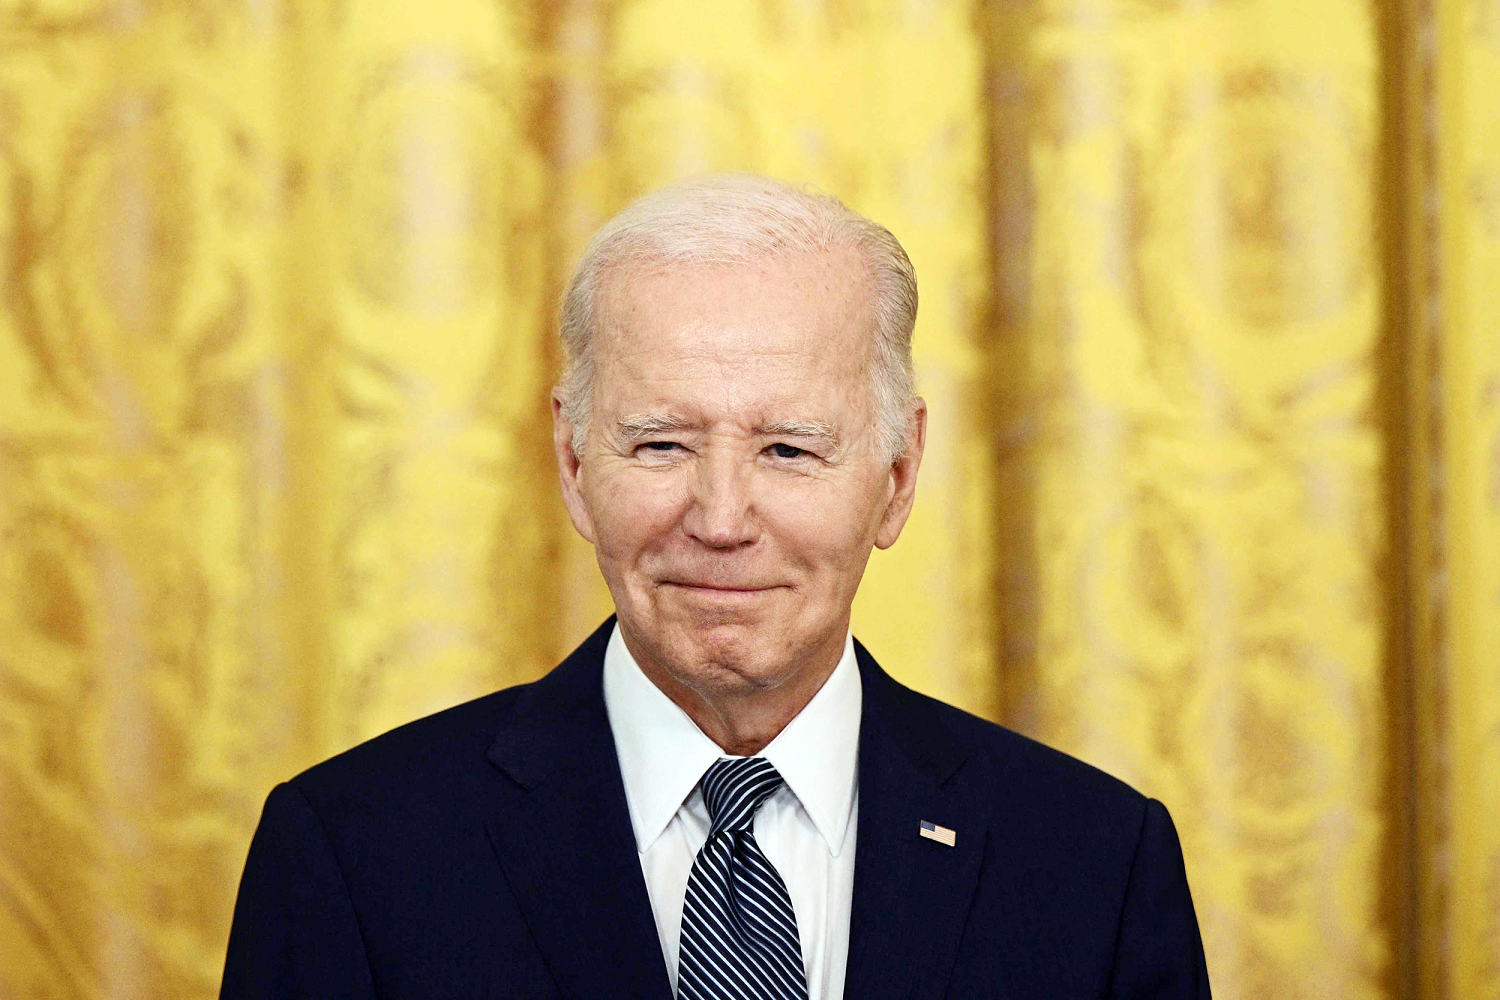 Biden is skipping a Super Bowl interview. His advisers say it’s part of the plan.